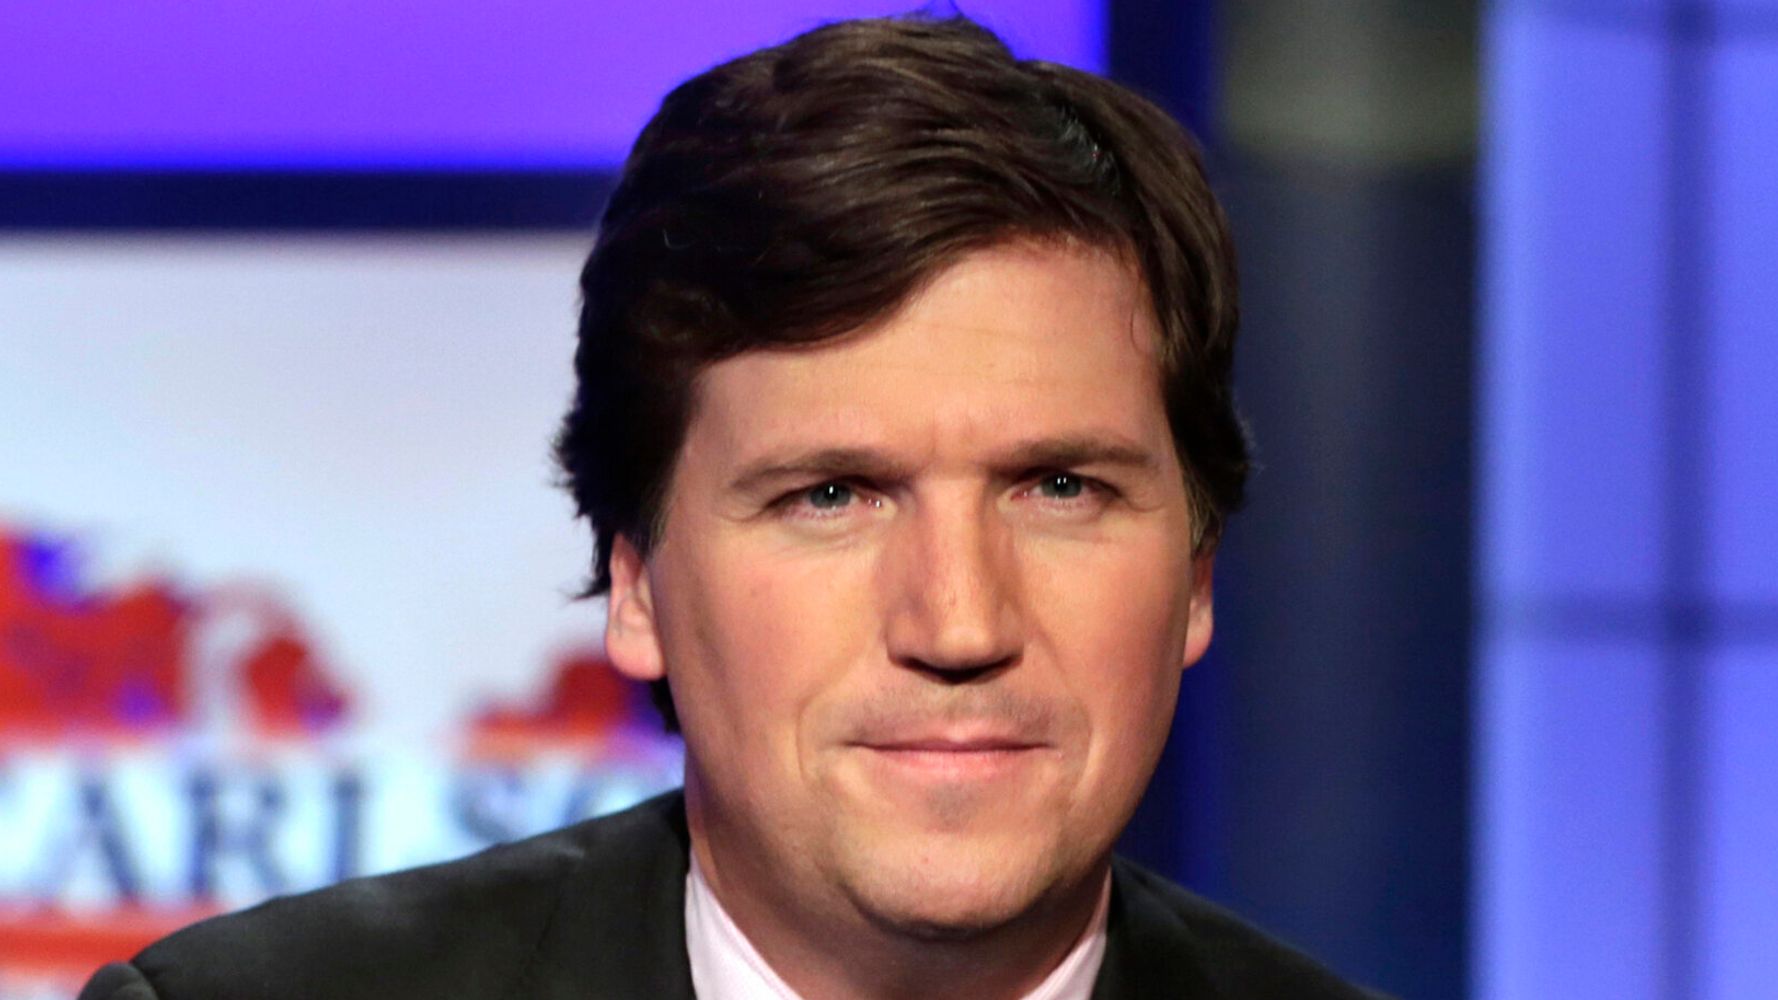 Tucker Carlson Claims White People Face COVID-19 Discrimination